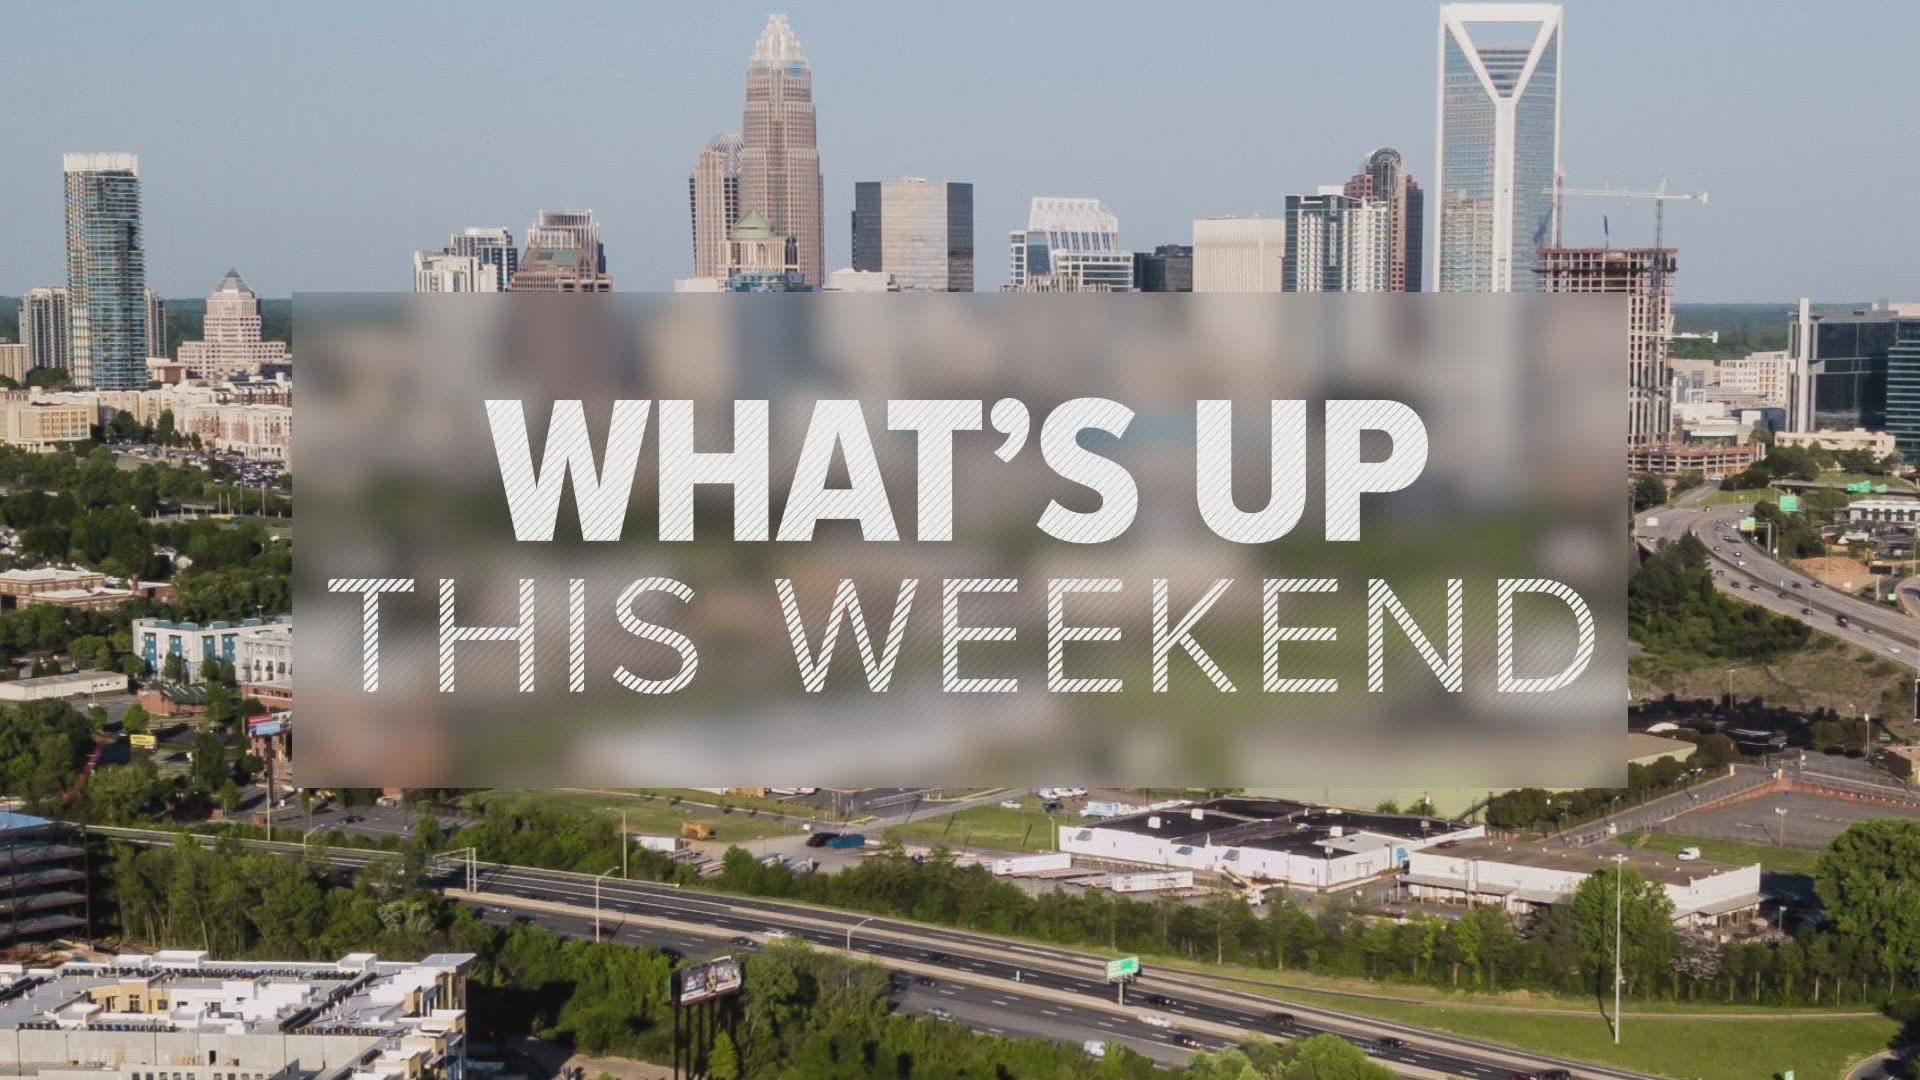 As summer transitions to fall, there's still plenty to do in the Queen City this weekend. Here's a sampling of the fun to be had.